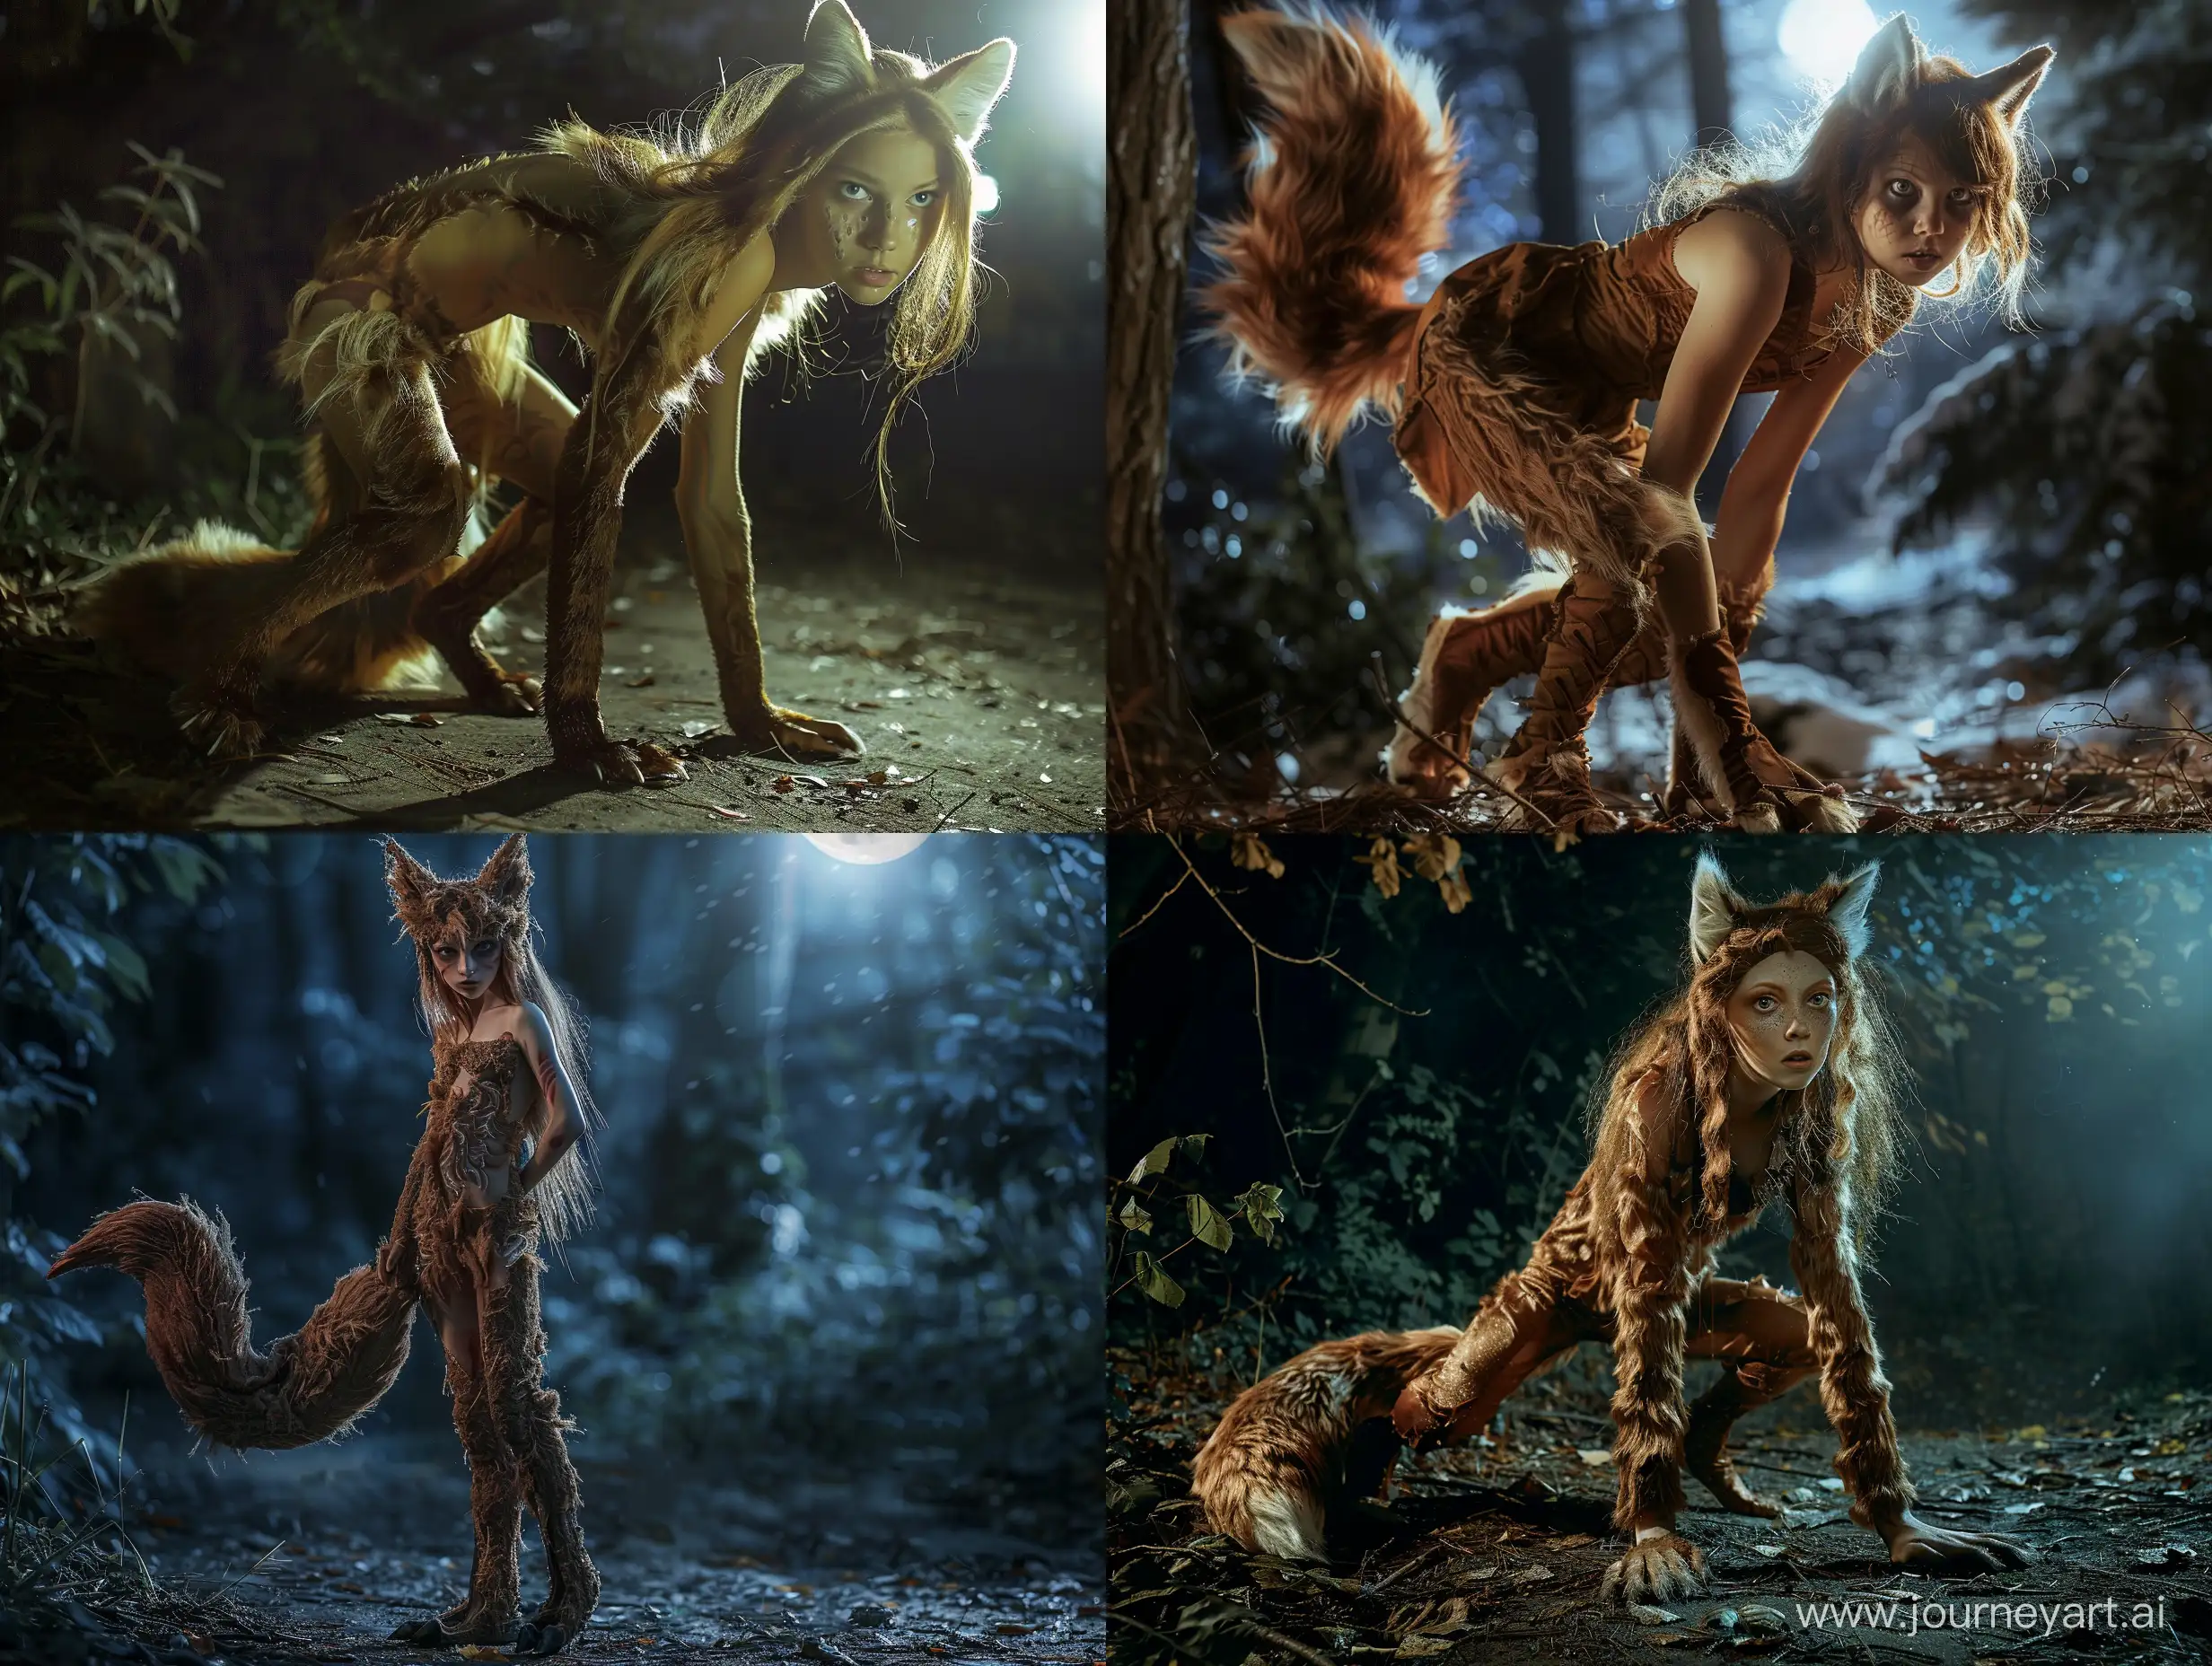 A photograph of a young woman who is transforming into a fox due to a magic spell. She has fur, a tail and paws. She has no human features left. She is standing on all fours in a forest at night. Full body picture, moonlight